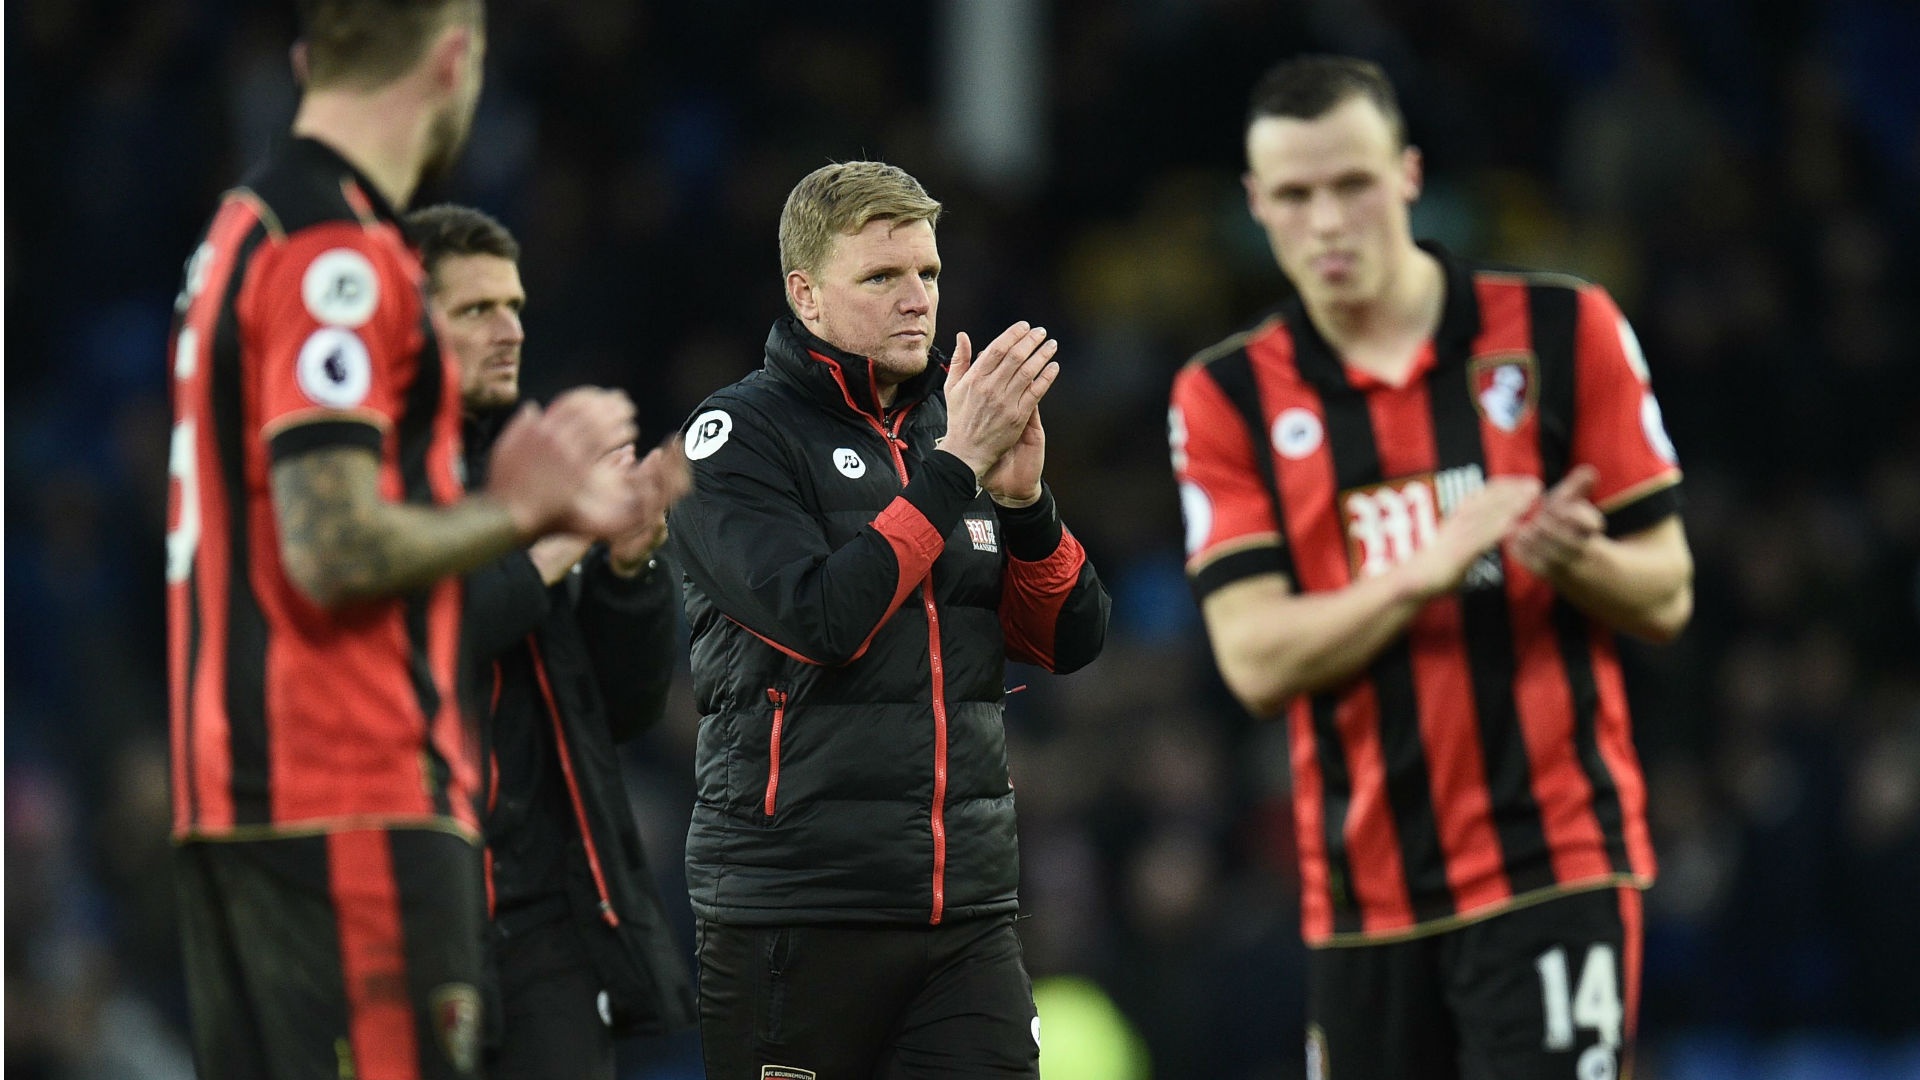 Bournemouth are looking over shoulder - Howe